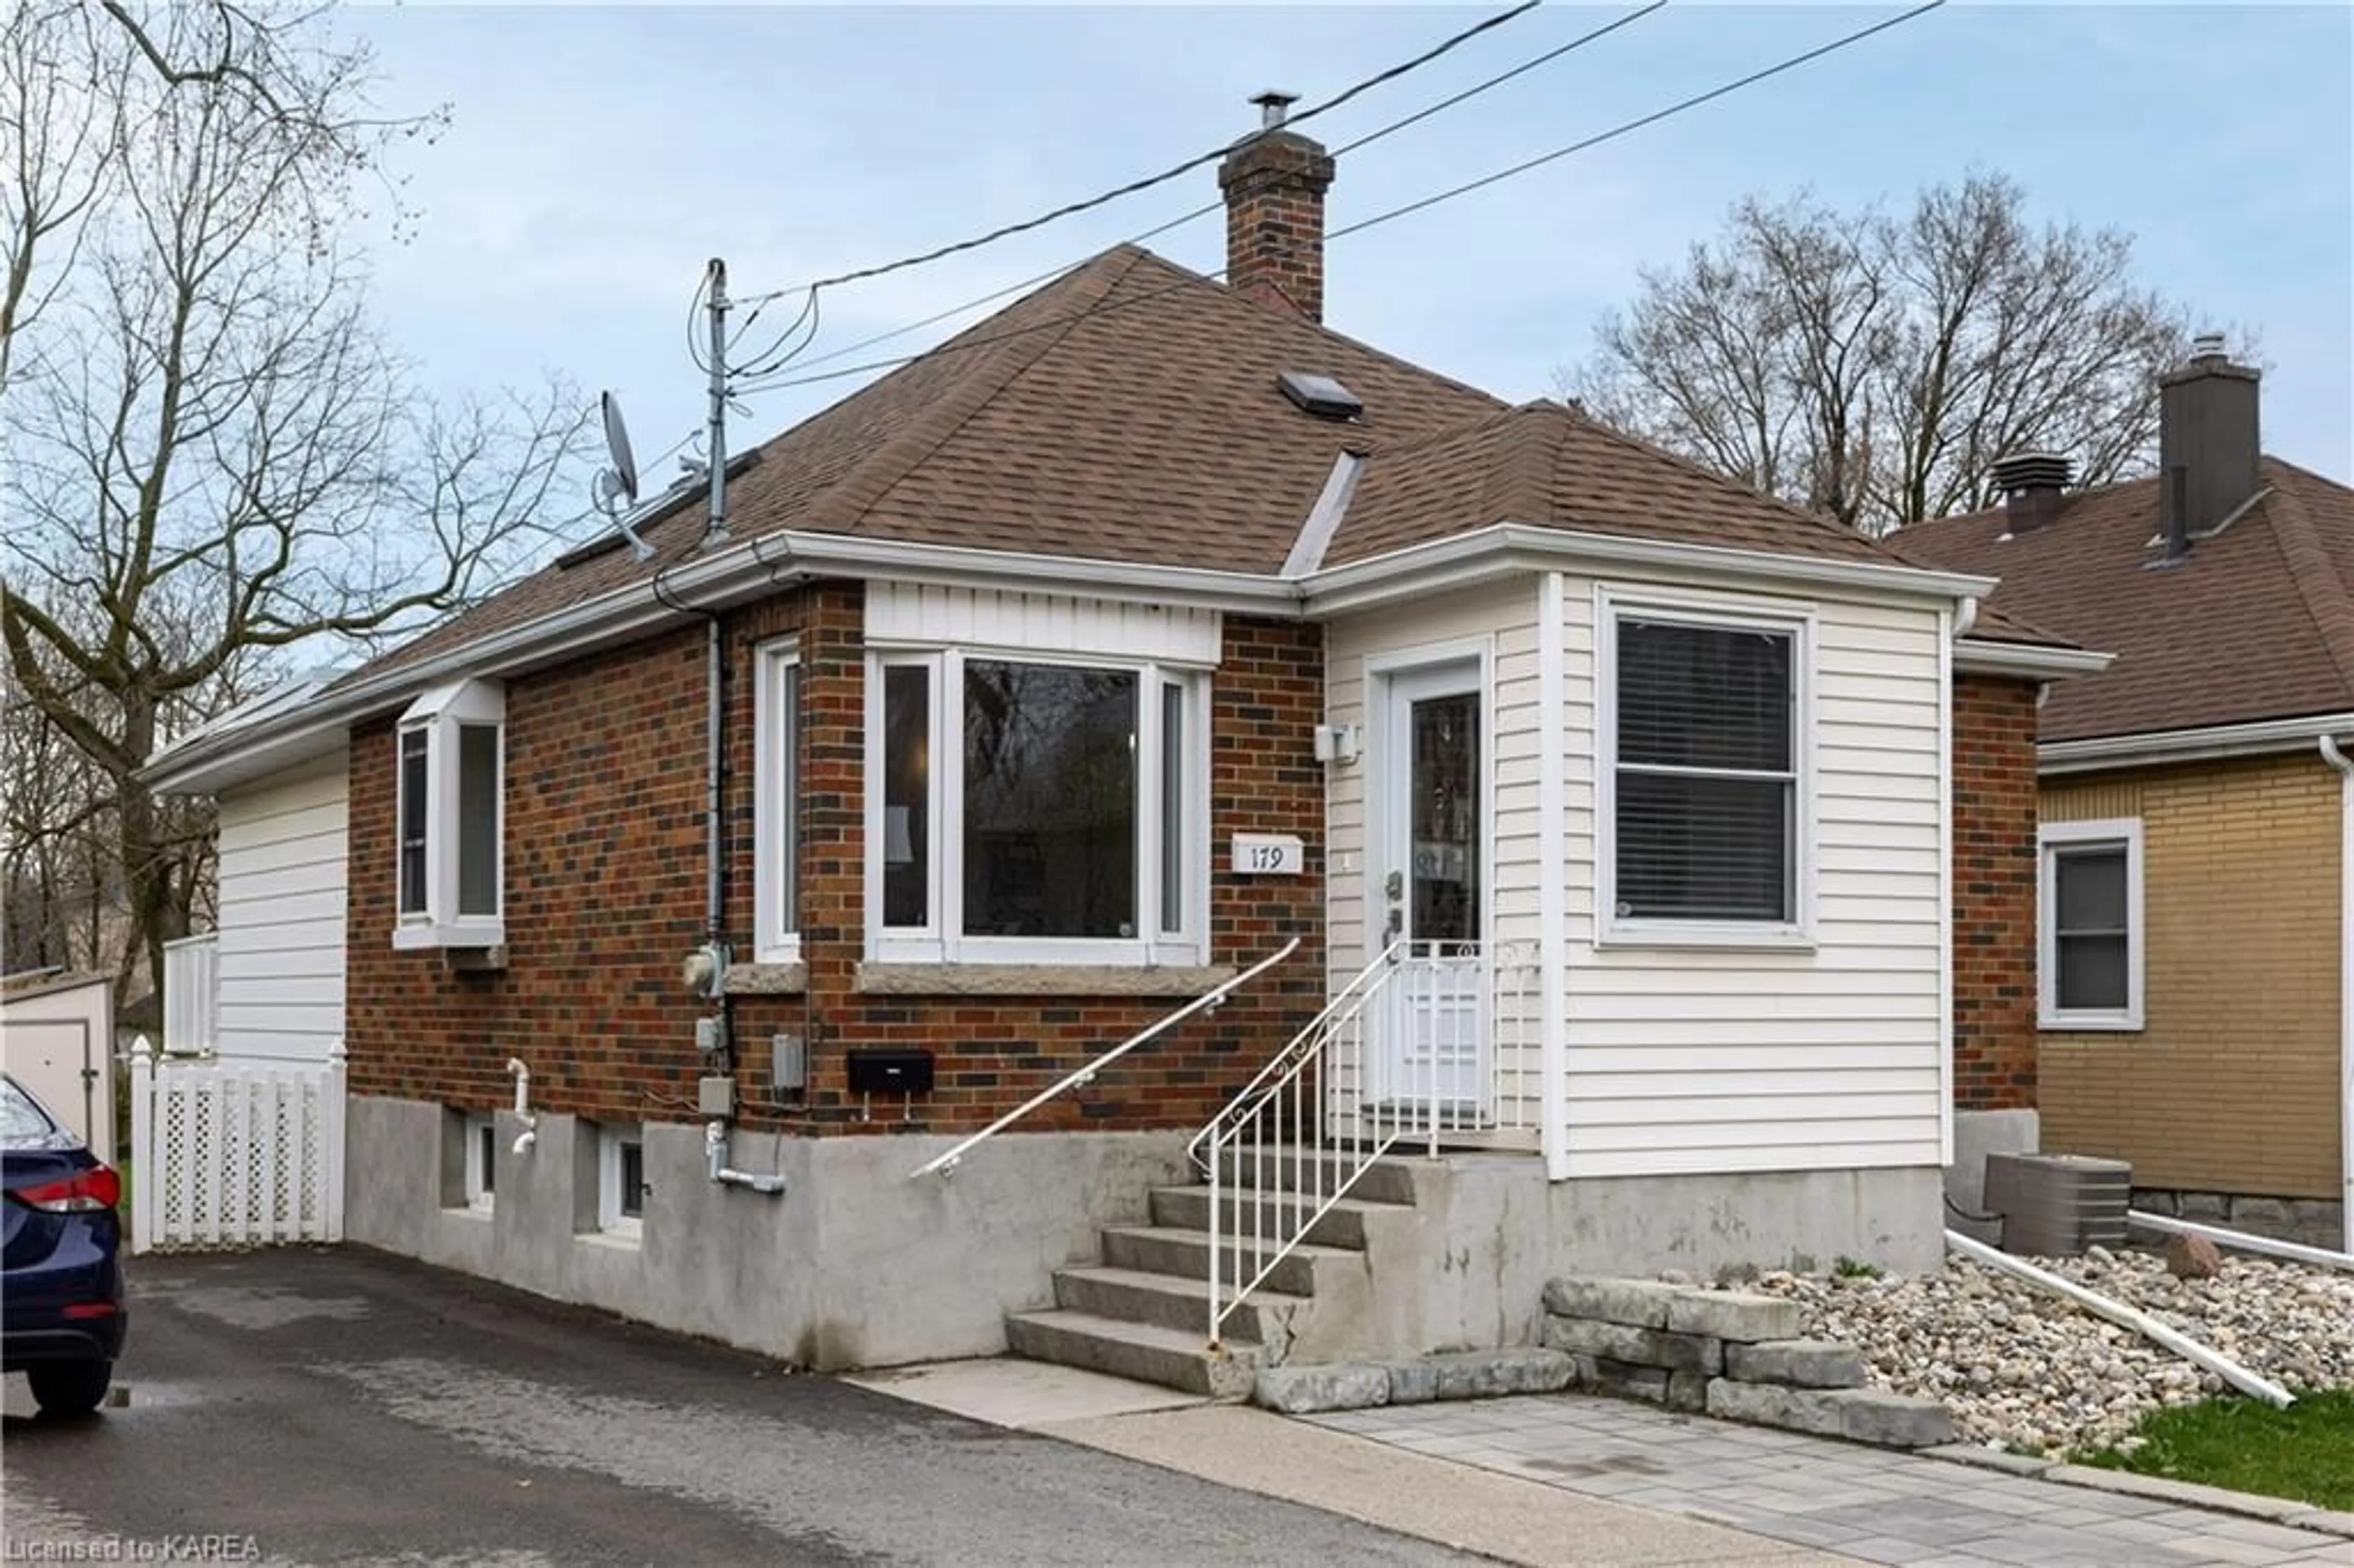 Frontside or backside of a home for 179 Toronto St, Kingston Ontario K7L 4A9